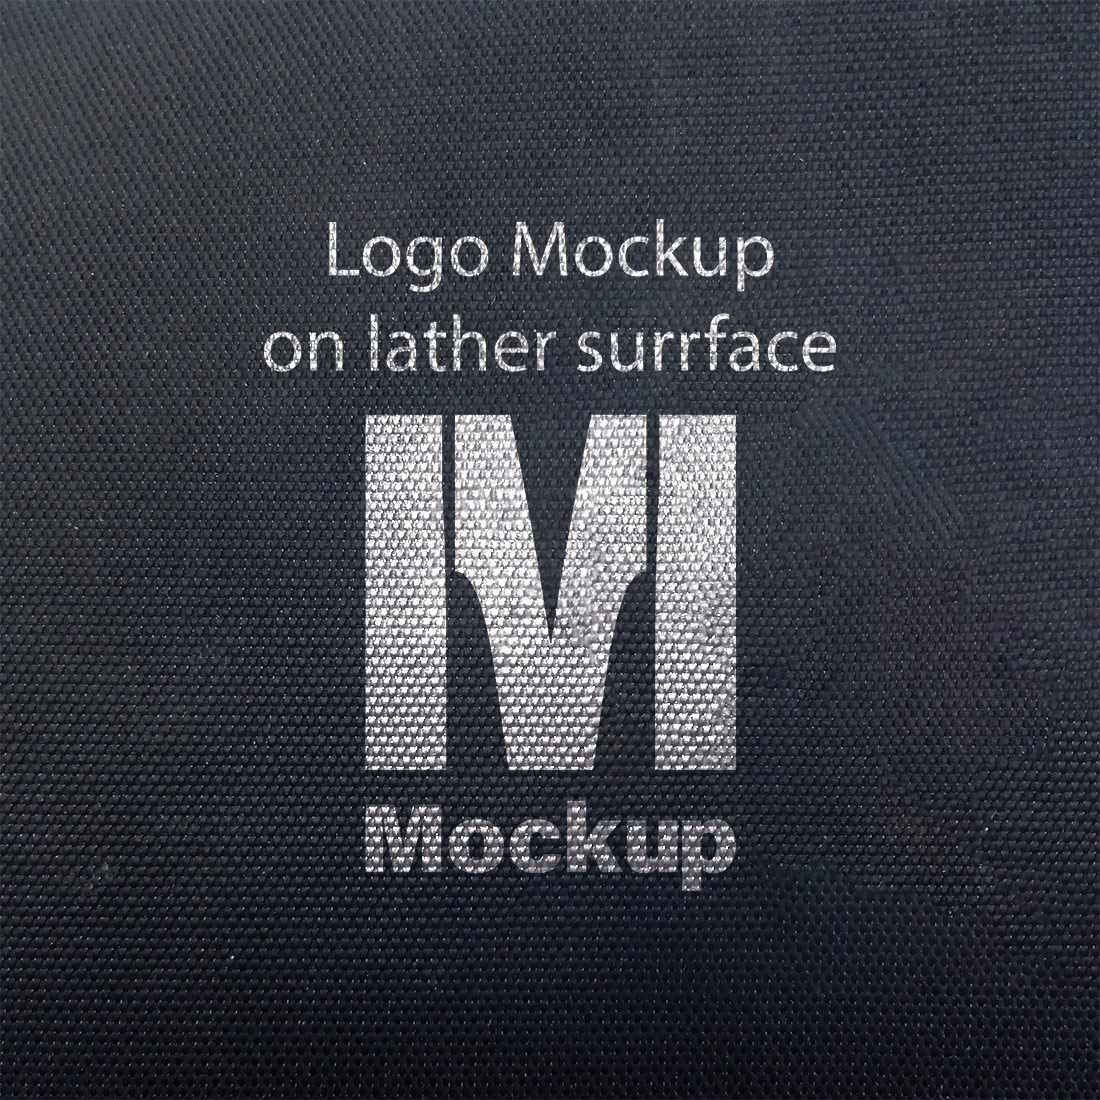 Mockup template cover image.